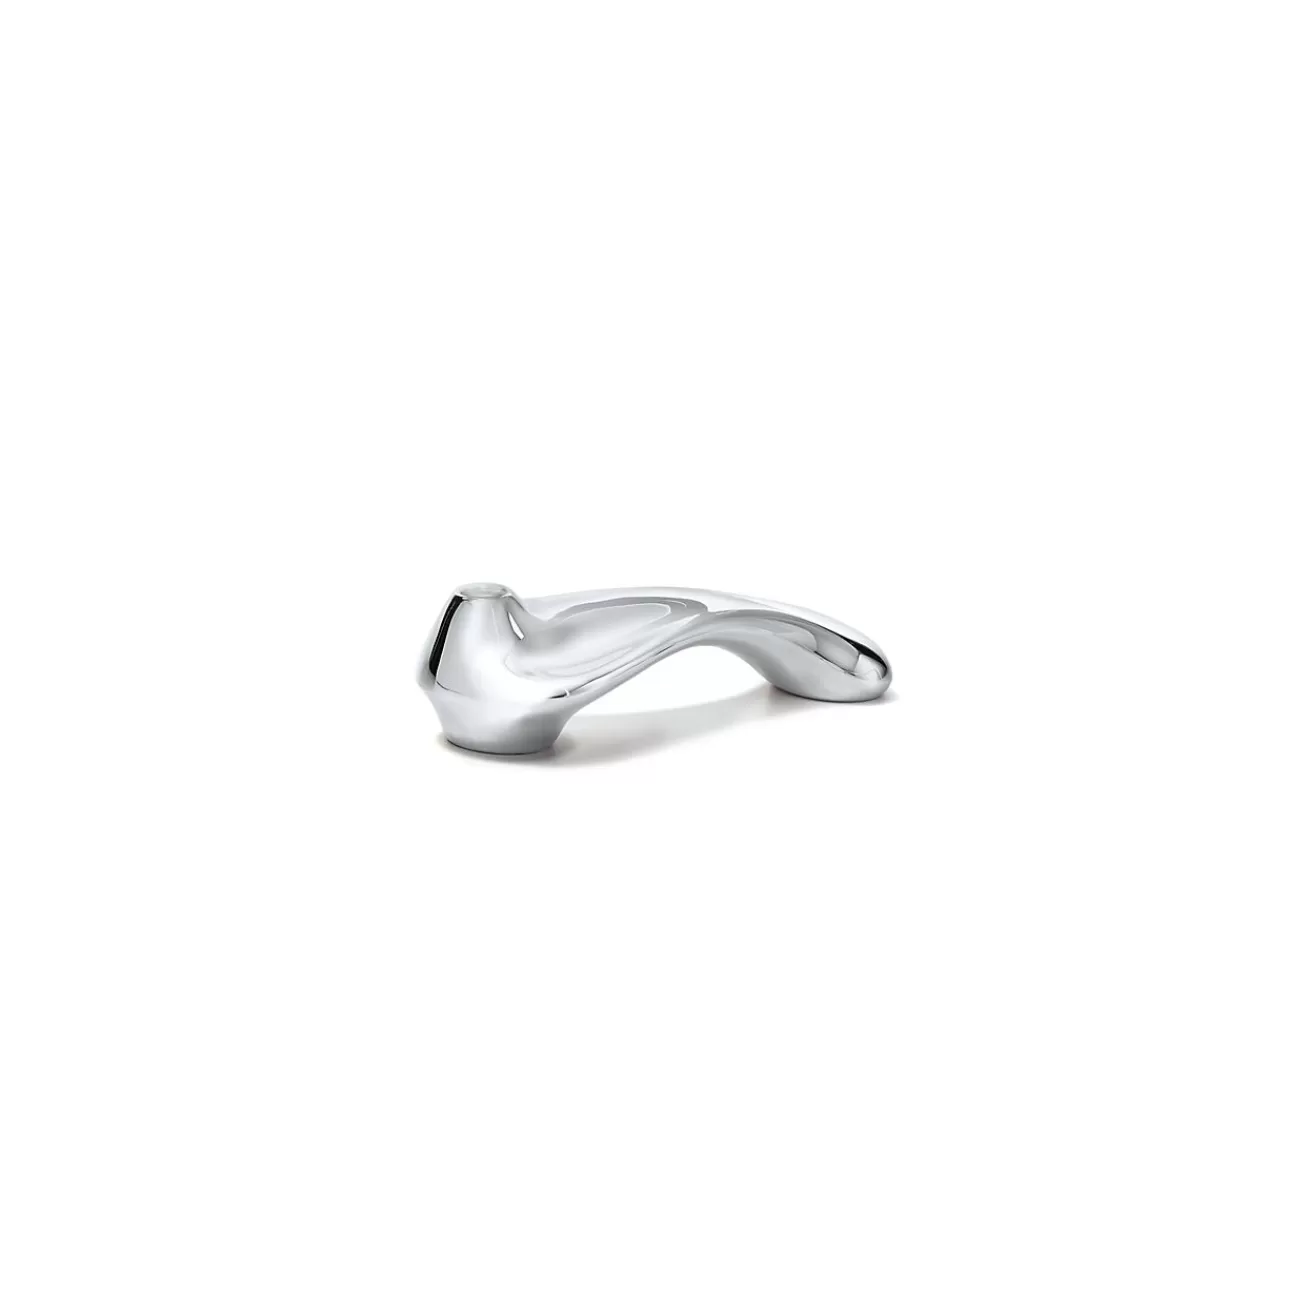 Tiffany & Co. Elsa Peretti® hand candle holder in sterling silver. | ^ Decor | Candles